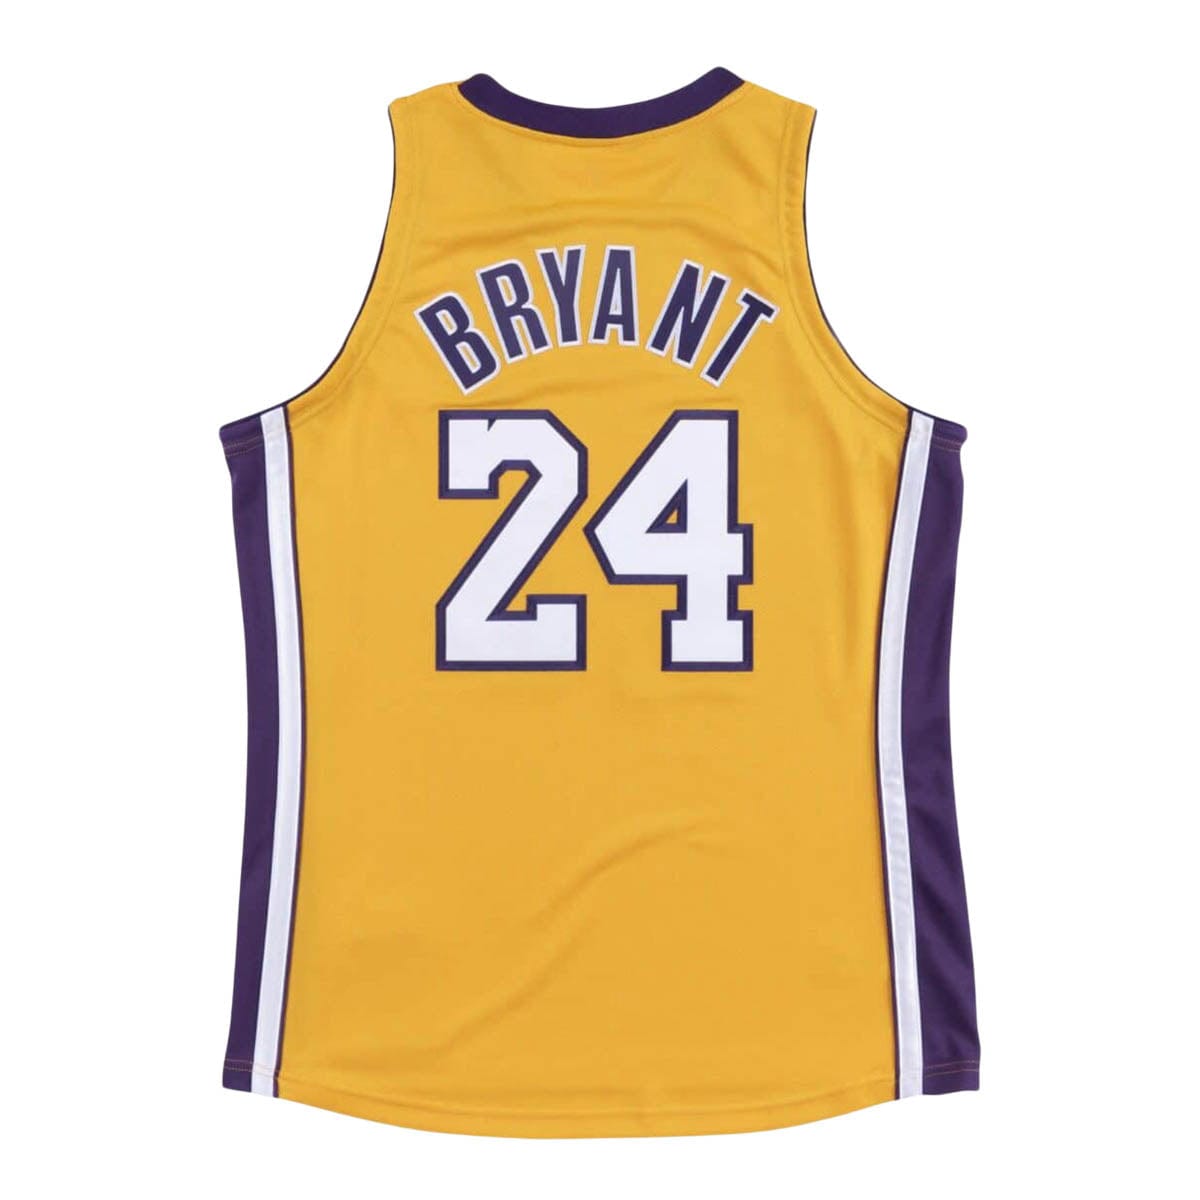 The jersey of Kobe Bryant of the Los Angeles Lakers is shown